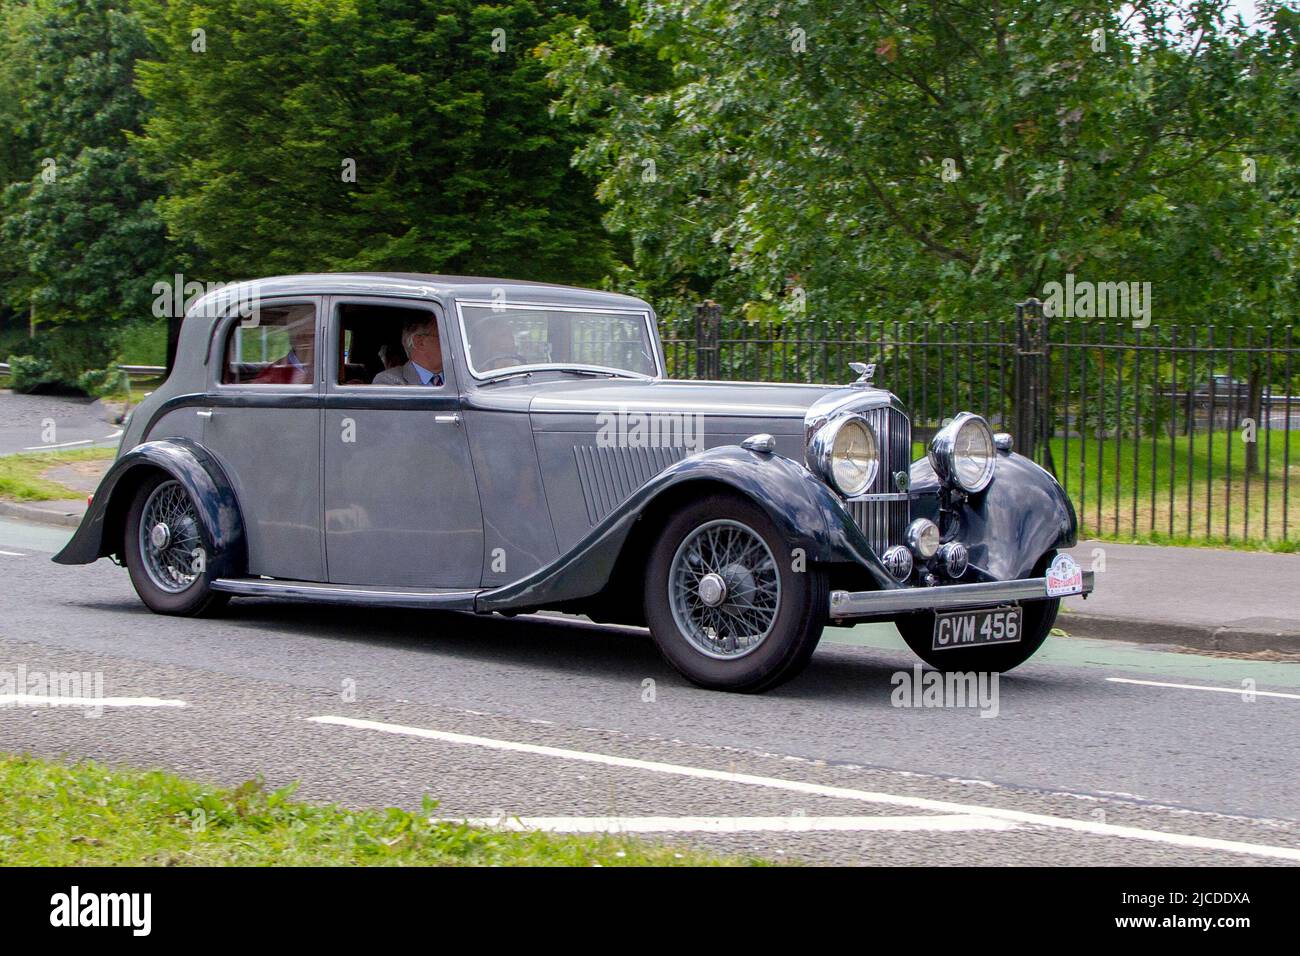 1936 30s thirties pre-war grey Bentley 4257cc 3 speed automatic; automobiles featured during the 58th year of the Manchester to Blackpool Touring Assembly for Veteran, Vintage, Classic and Cherished cars. Stock Photo